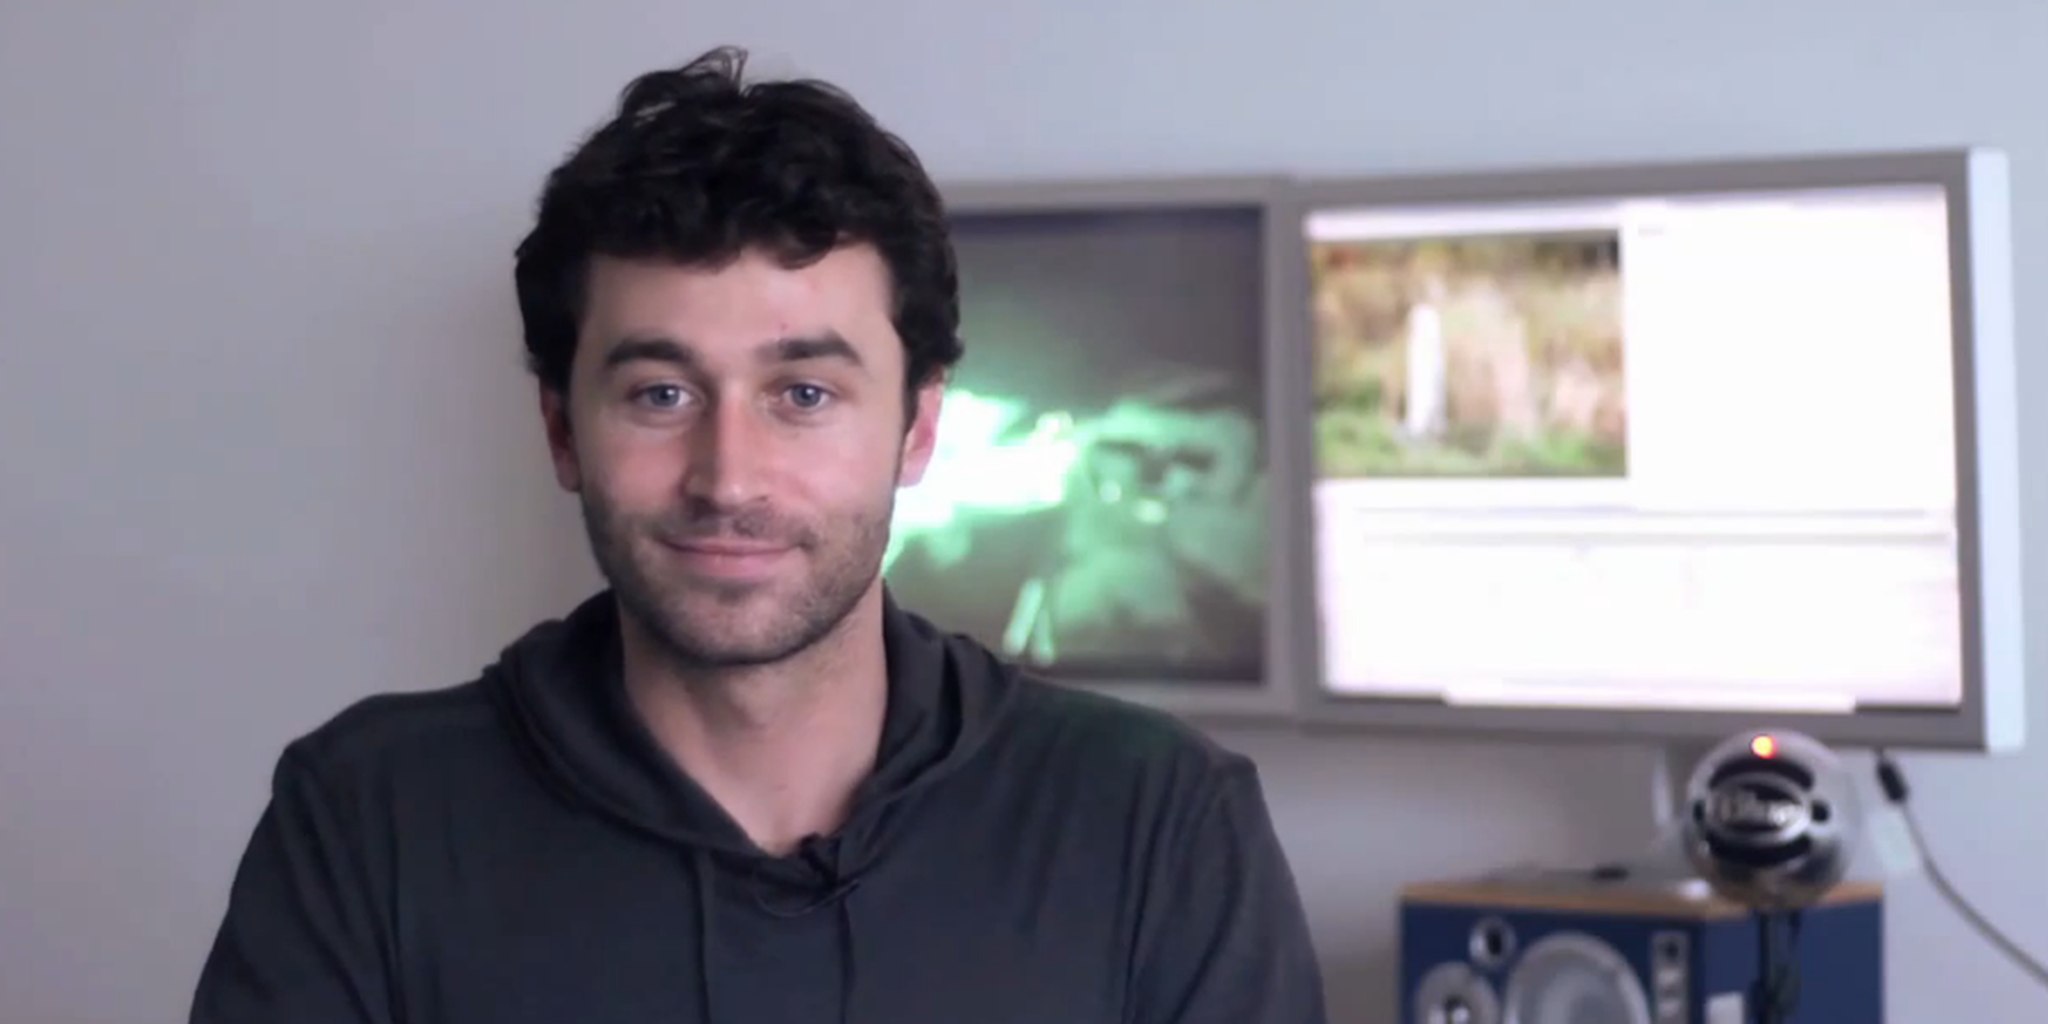 What its like to shoot an amateur scene with James Deen